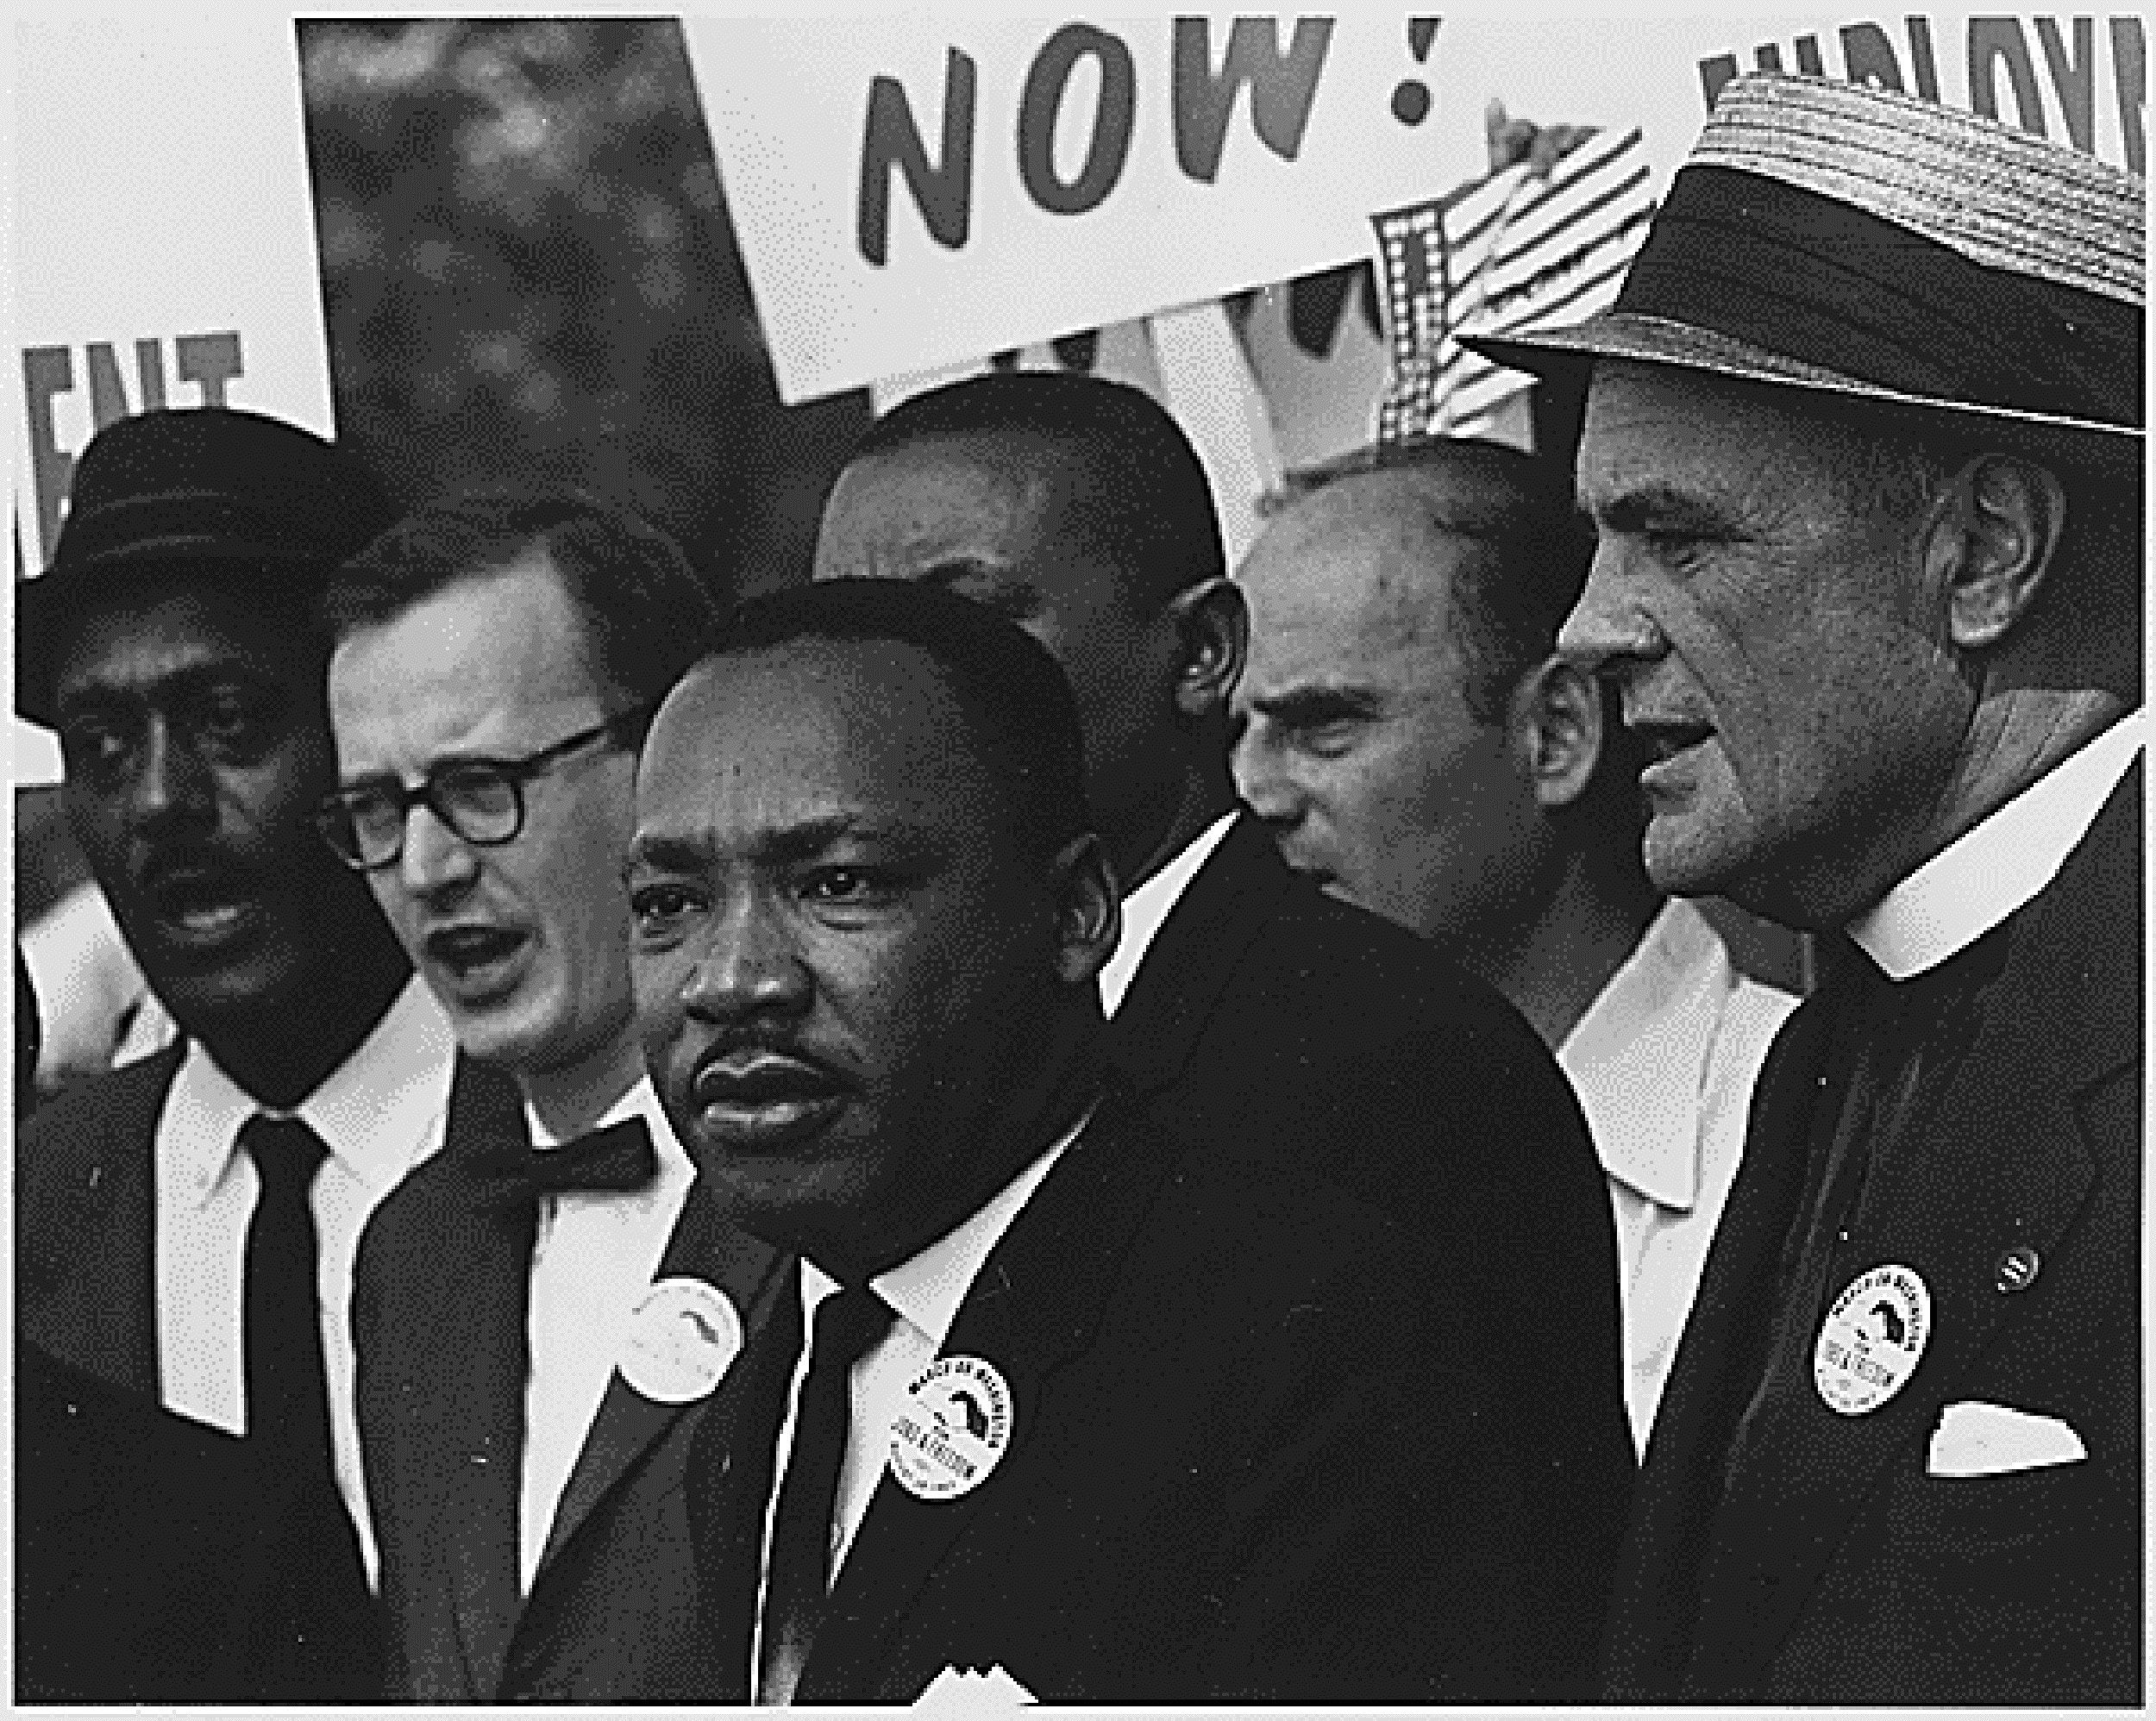 Martin Luther King at the 1963 March on Washington